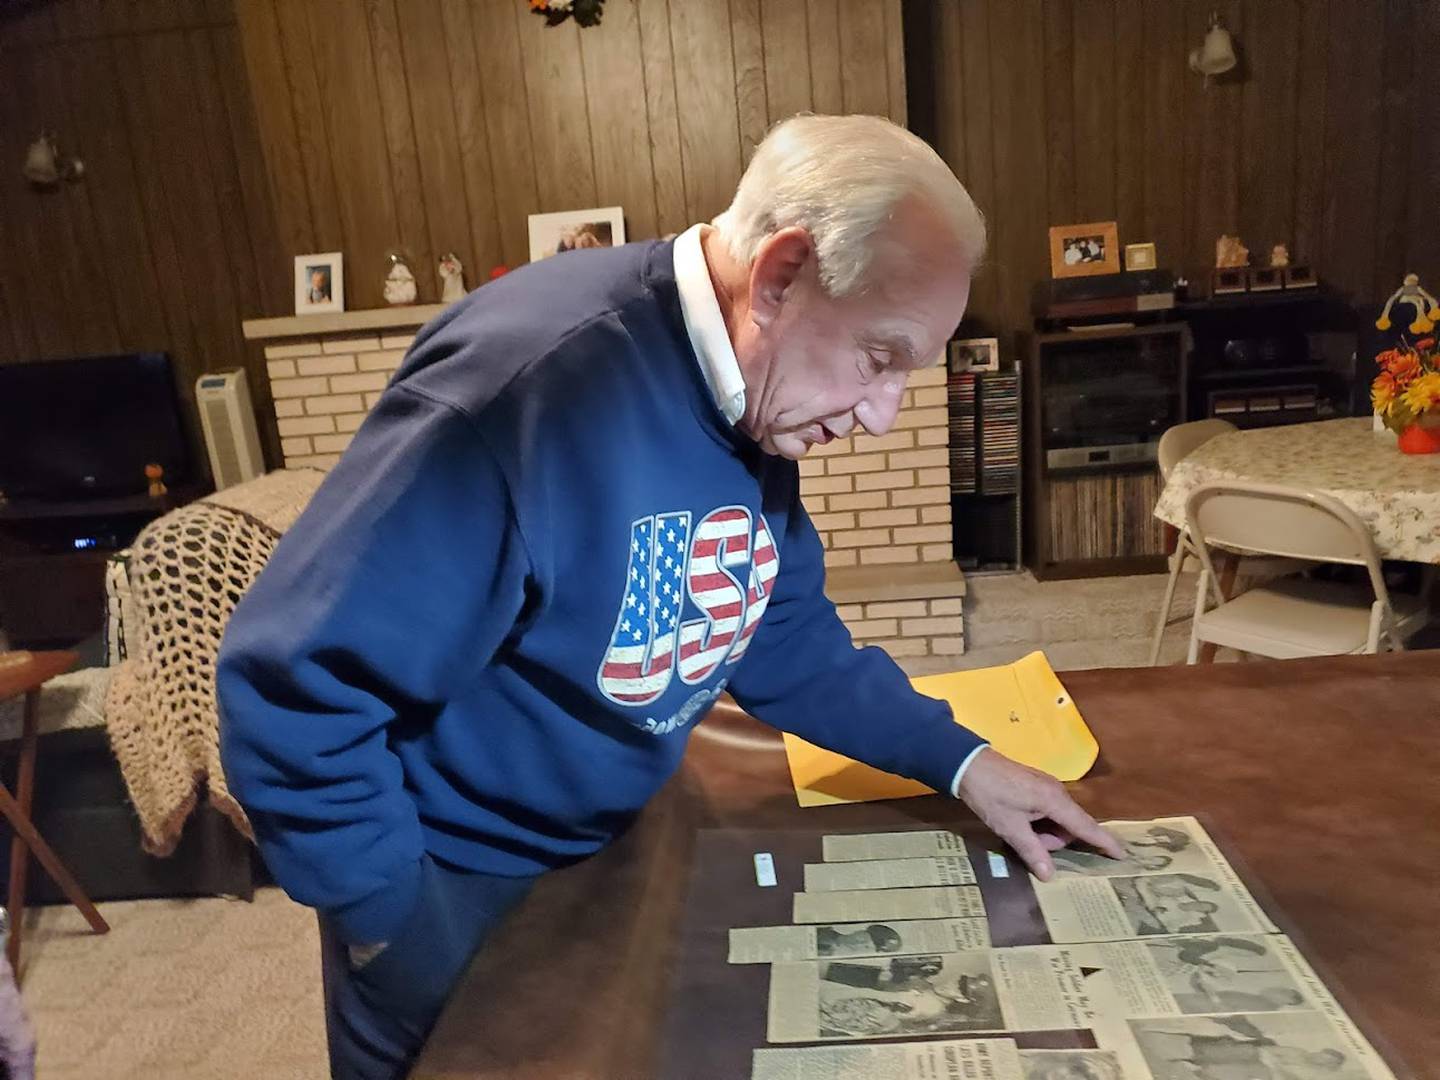 Robert Ceci of Joliet looks through old clippings from The Herald-News that Robert's mother Beverly Ceci had saved and laminated. These clippings are the only record Robert has of his father David Ceci's military service. David Ceci and four of his brothers had all served in the Army during World War II. One was killed in action and another was pronounced missing in action but later came home.